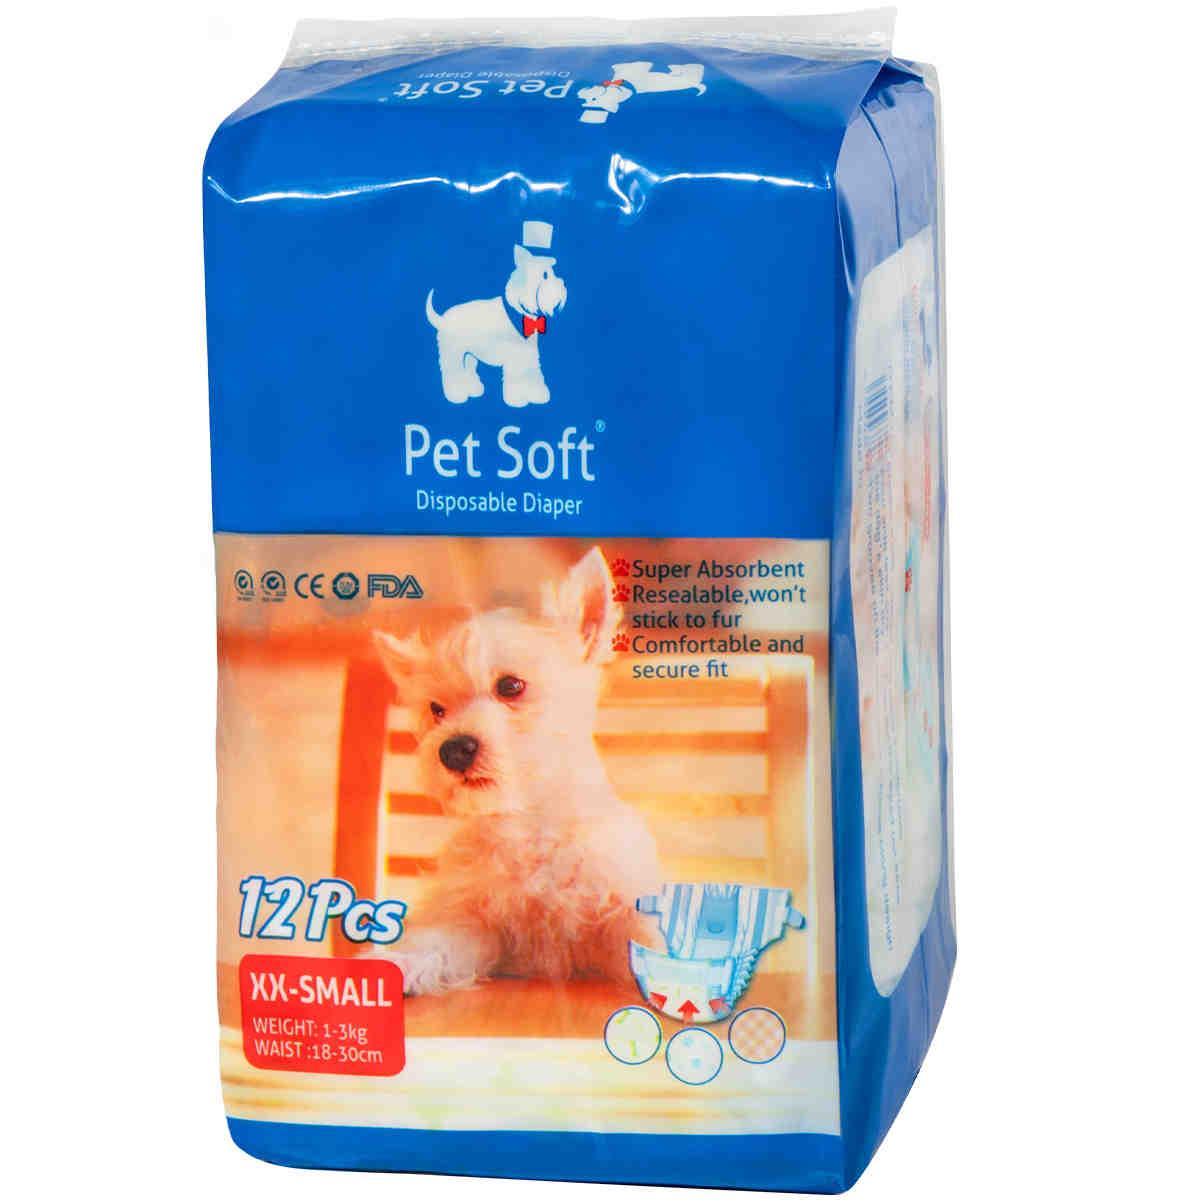 Disposable Female Puppy Dog Diaper